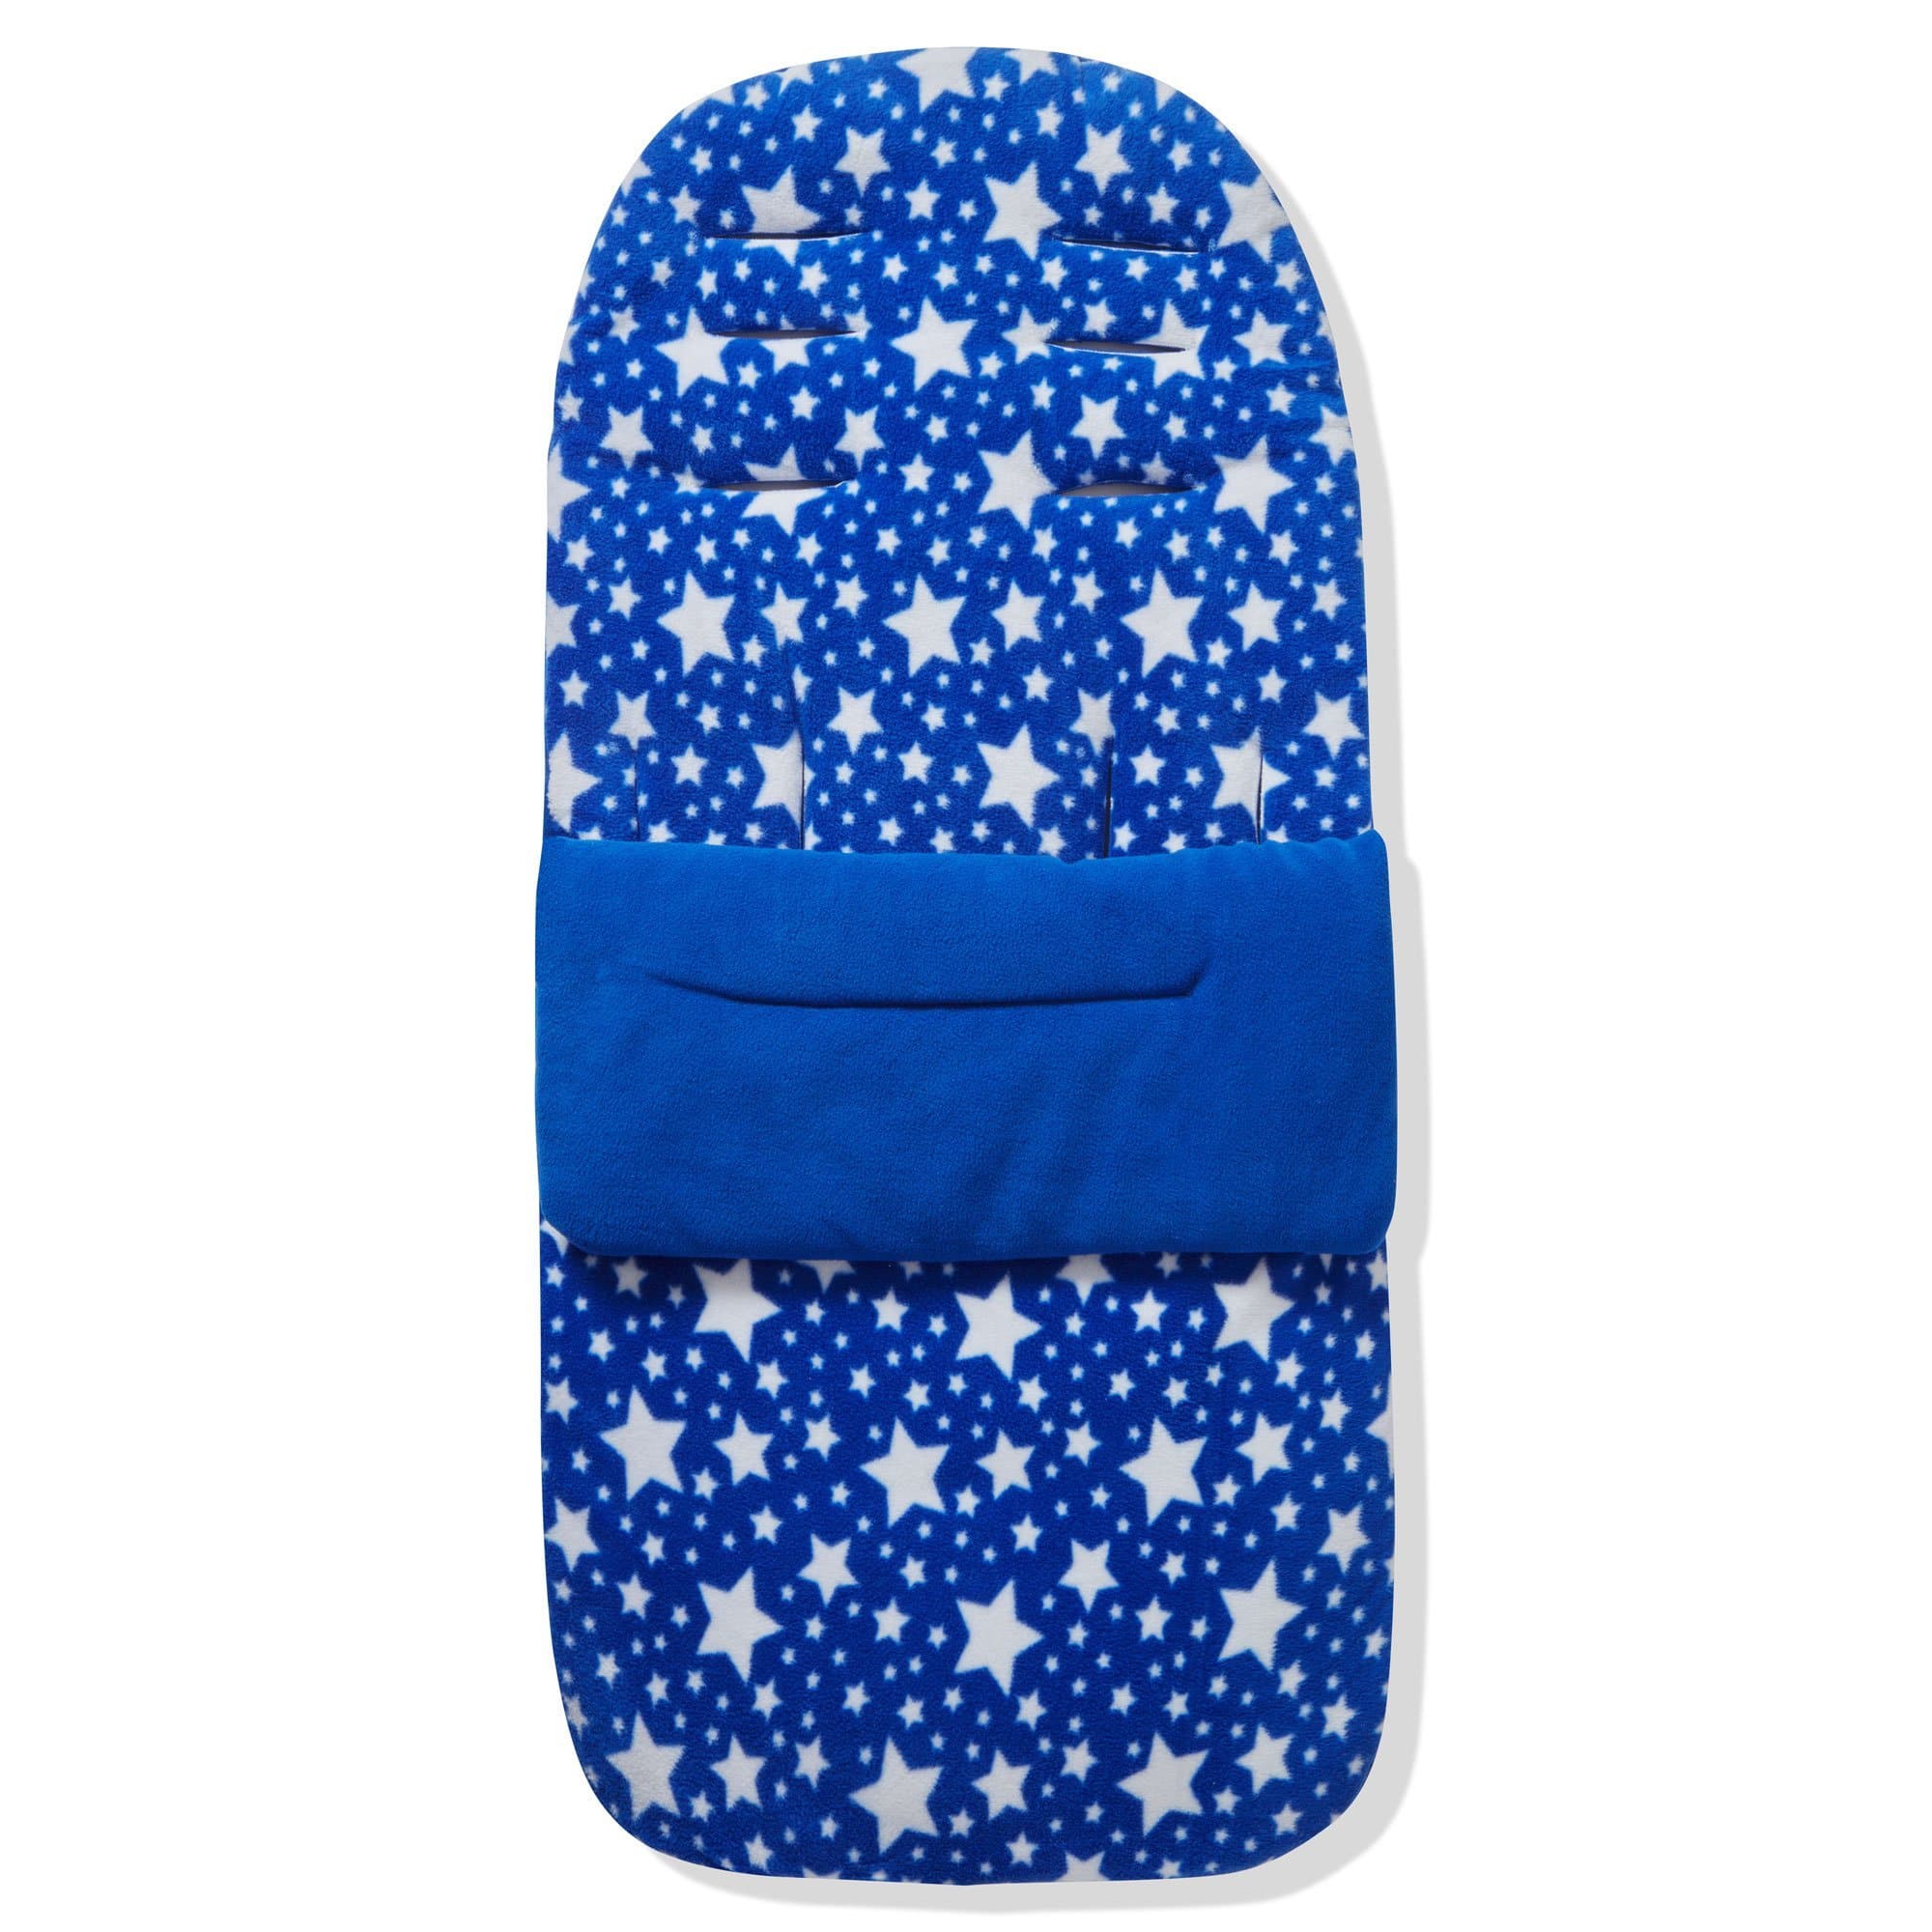 Fleece Footmuff / Cosy Toes Compatible with Inglesina - For Your Little One